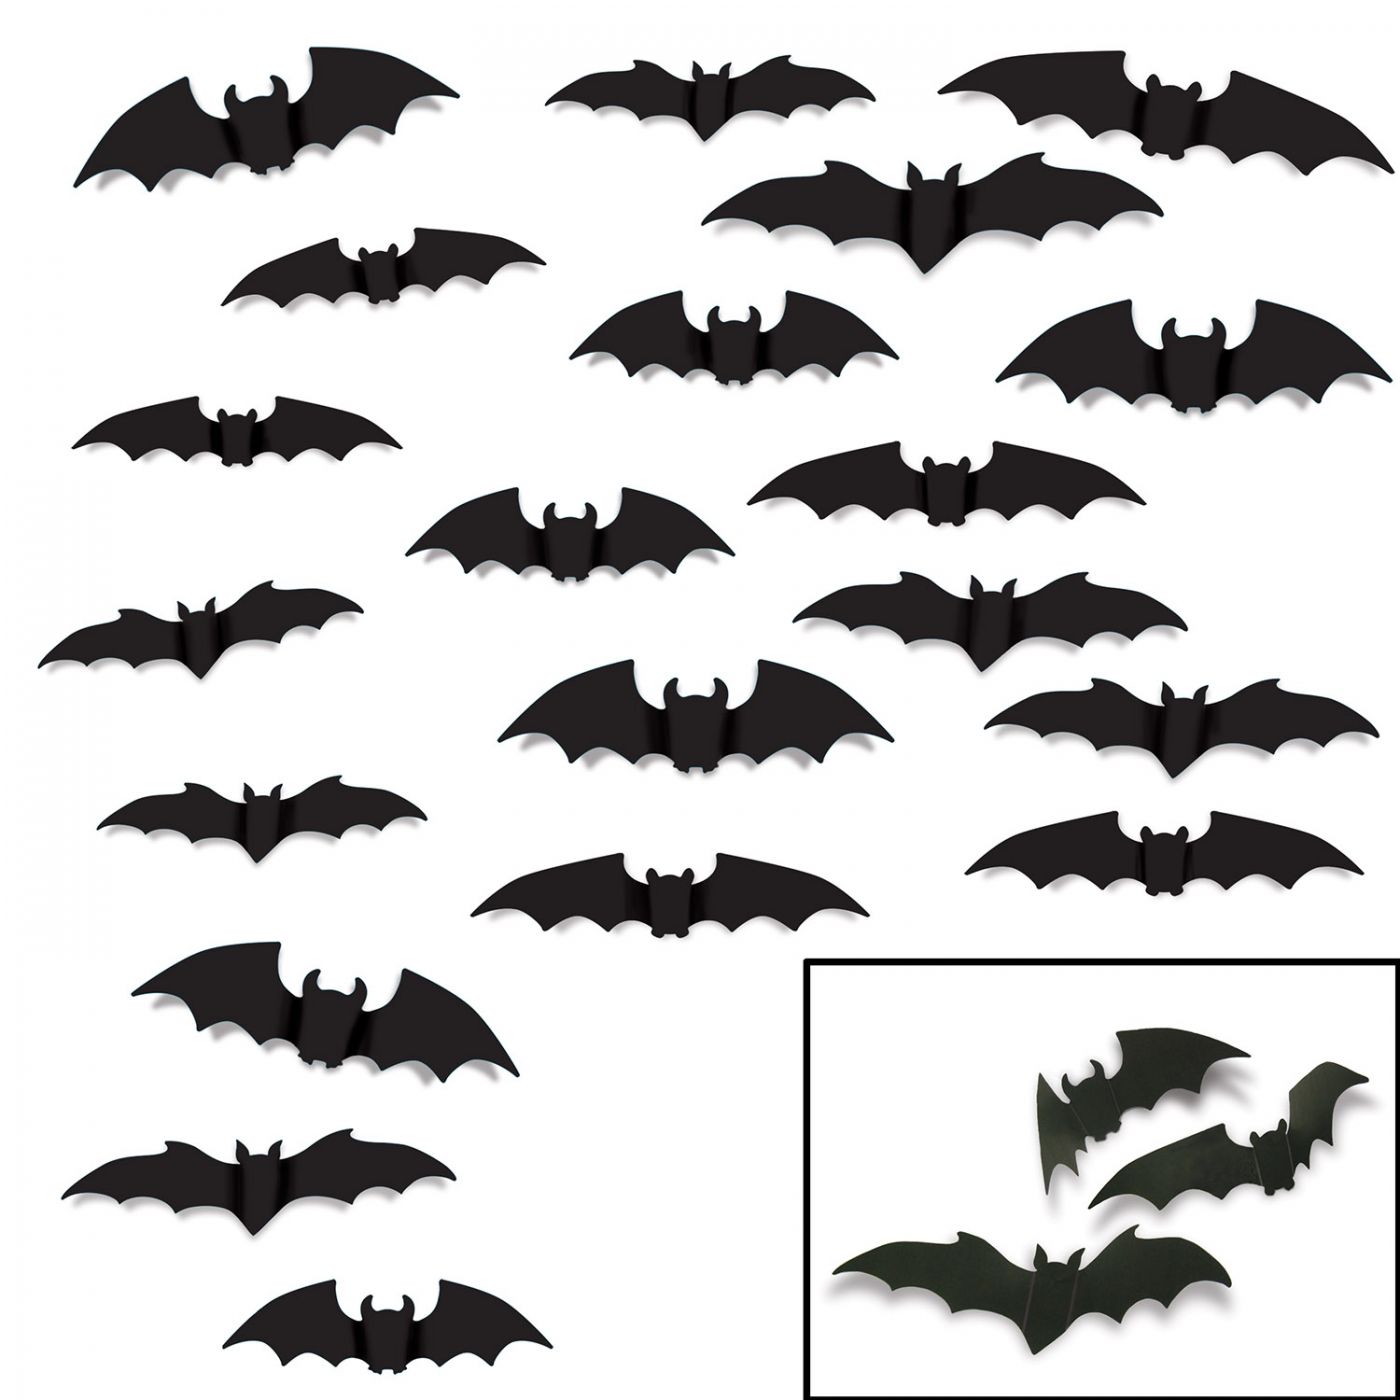 Image of Bat Silhouettes